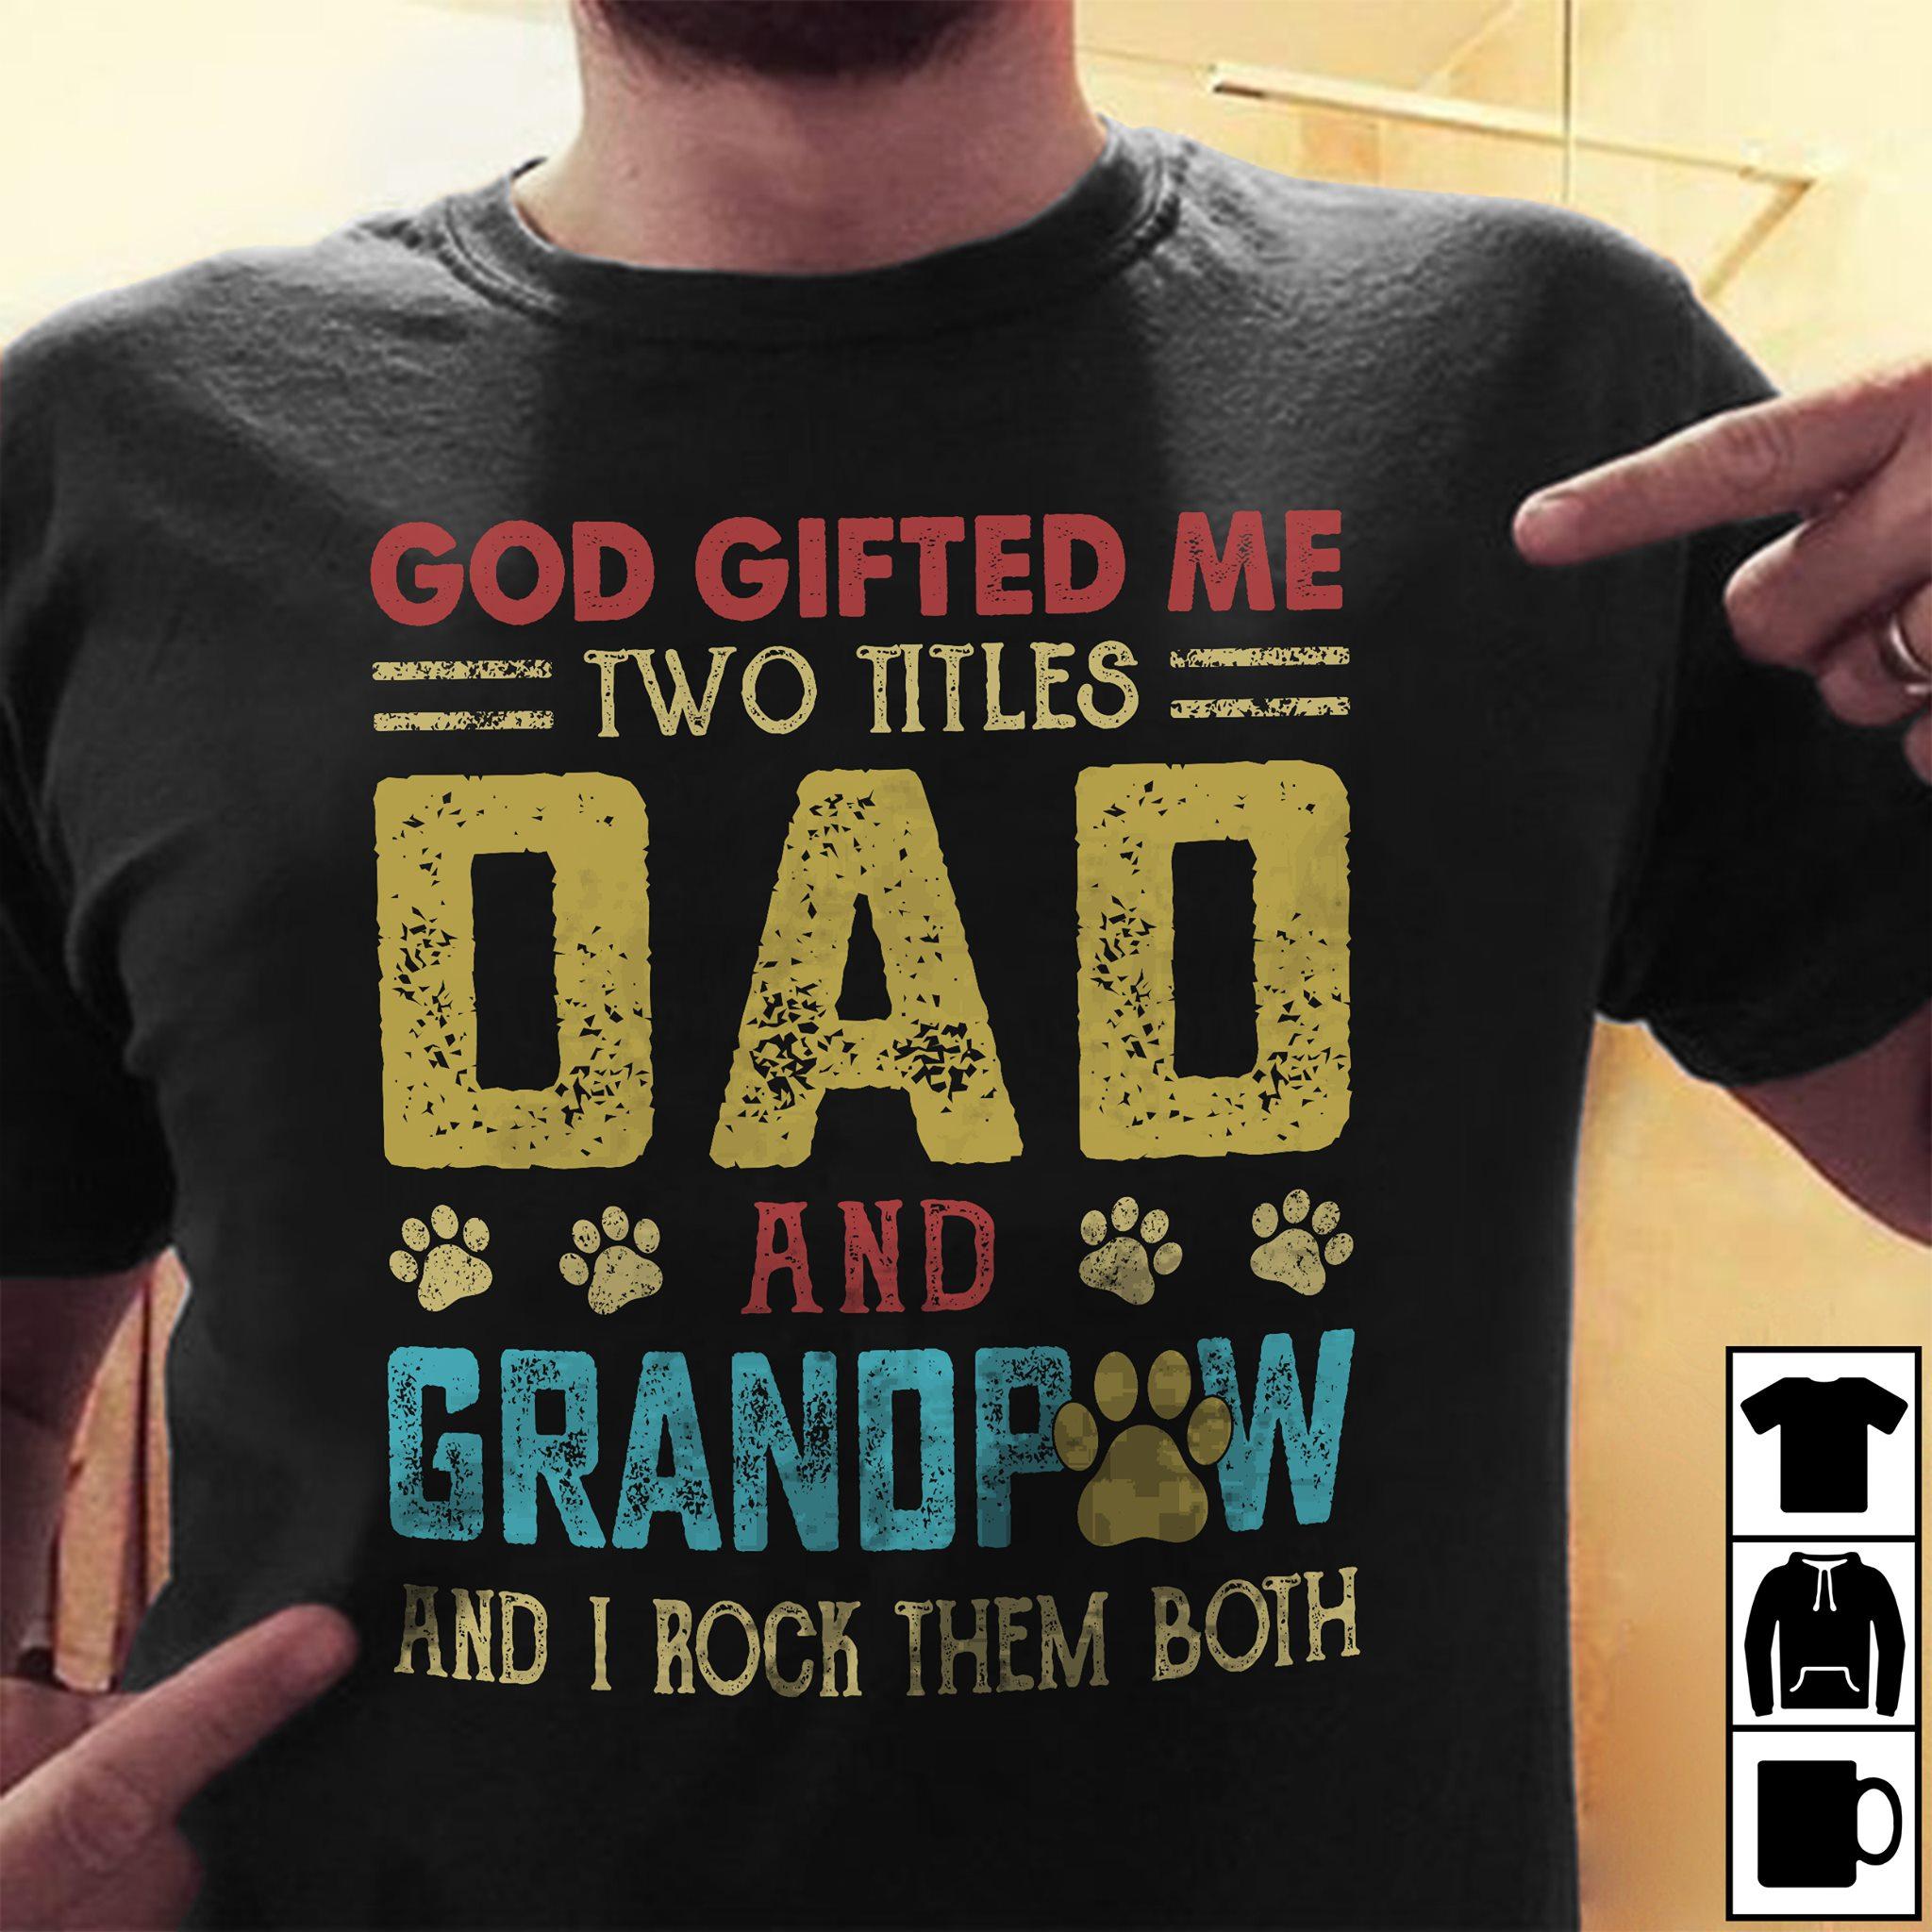 God gifted me two titles Dad and Grandpaw and I rock them both - Grandpa loves dogs